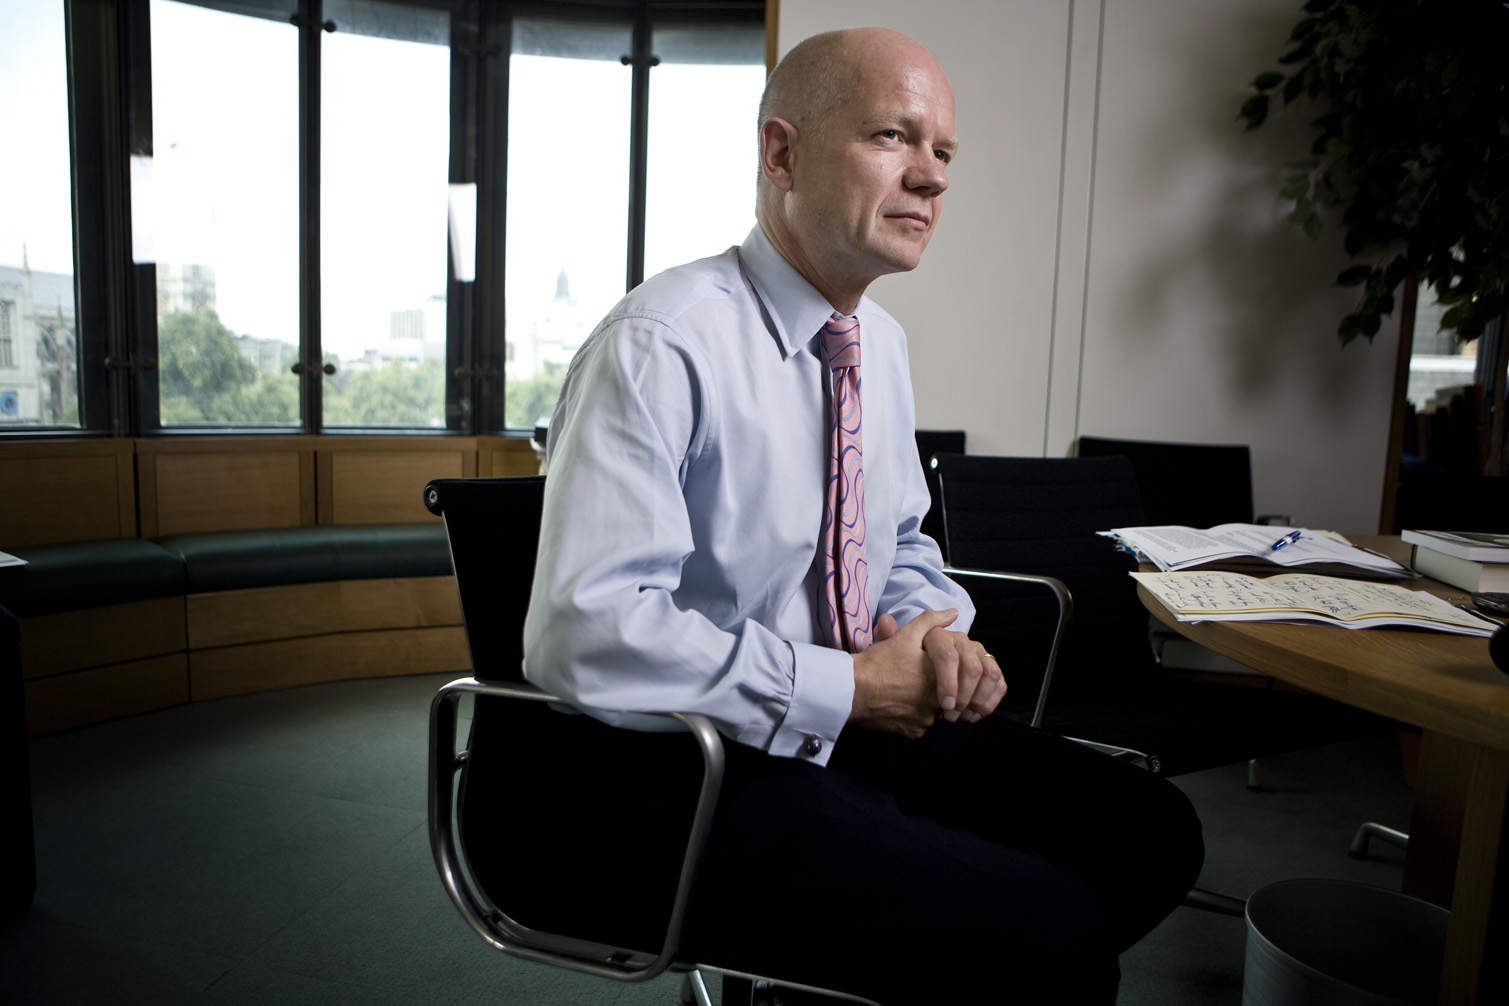 BBC Journalist Emily Maitlis is quizzed by MP William Hague